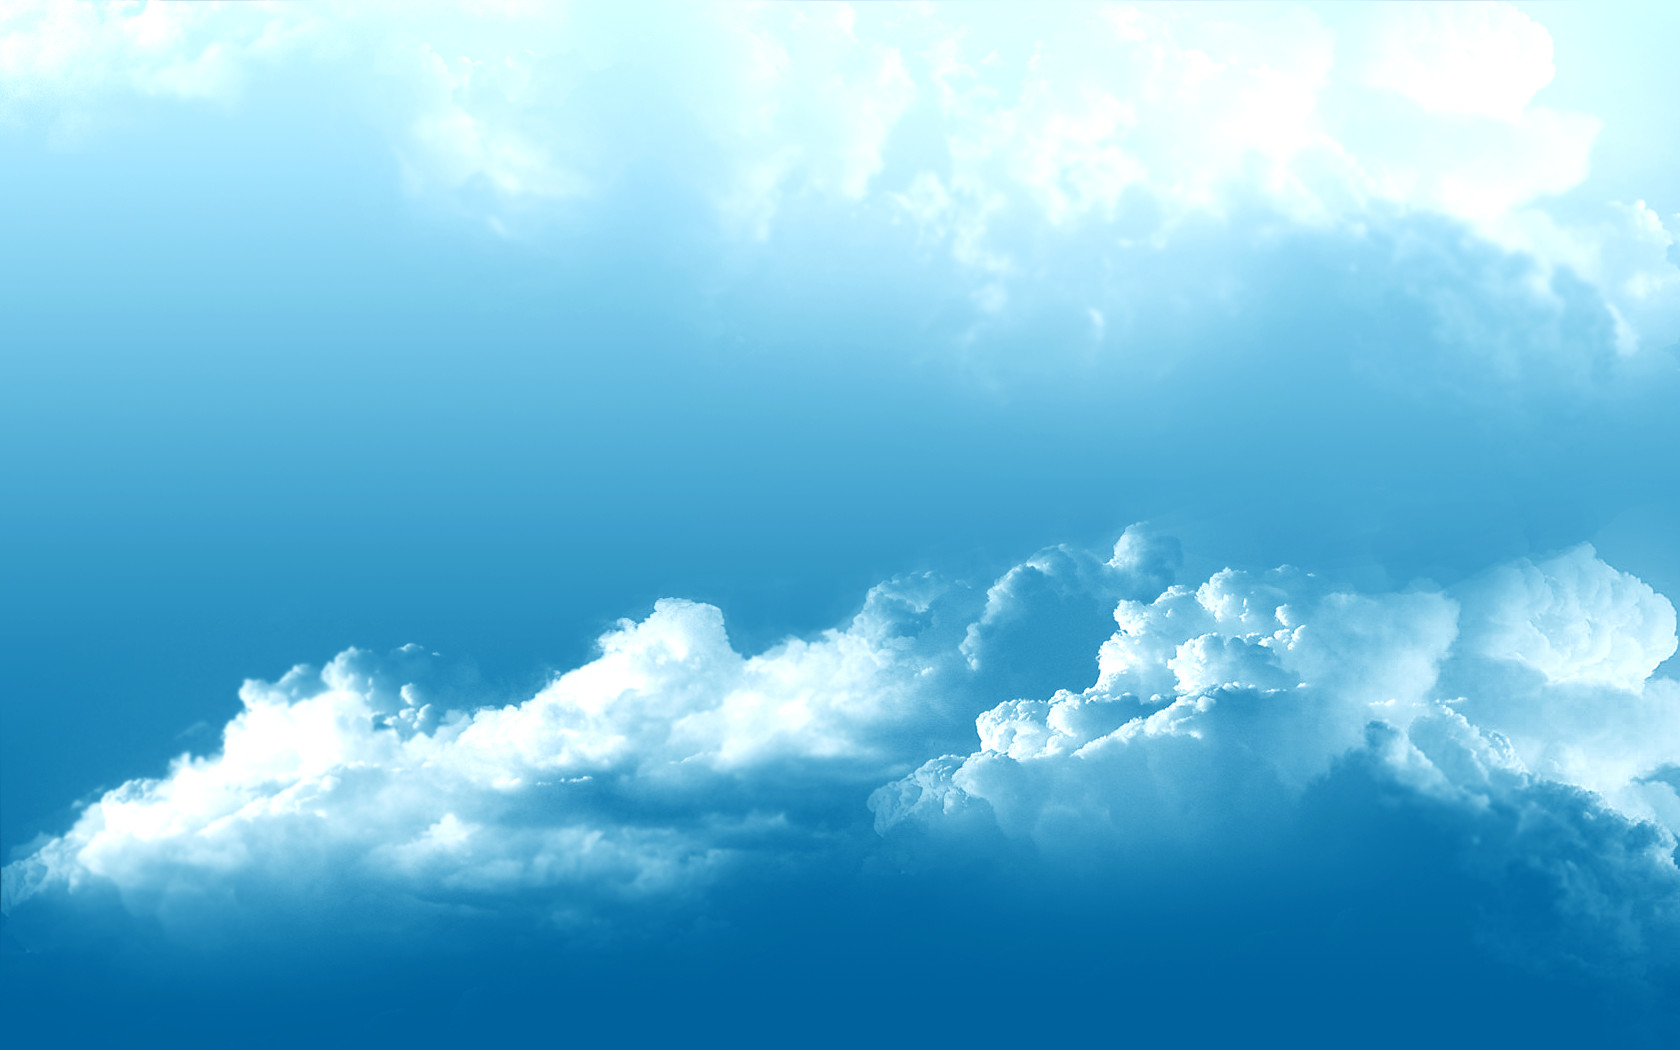 Free HQ Clouds Wall By Grubshaw Wallpaper   HQ Wallpapers 1680x1050